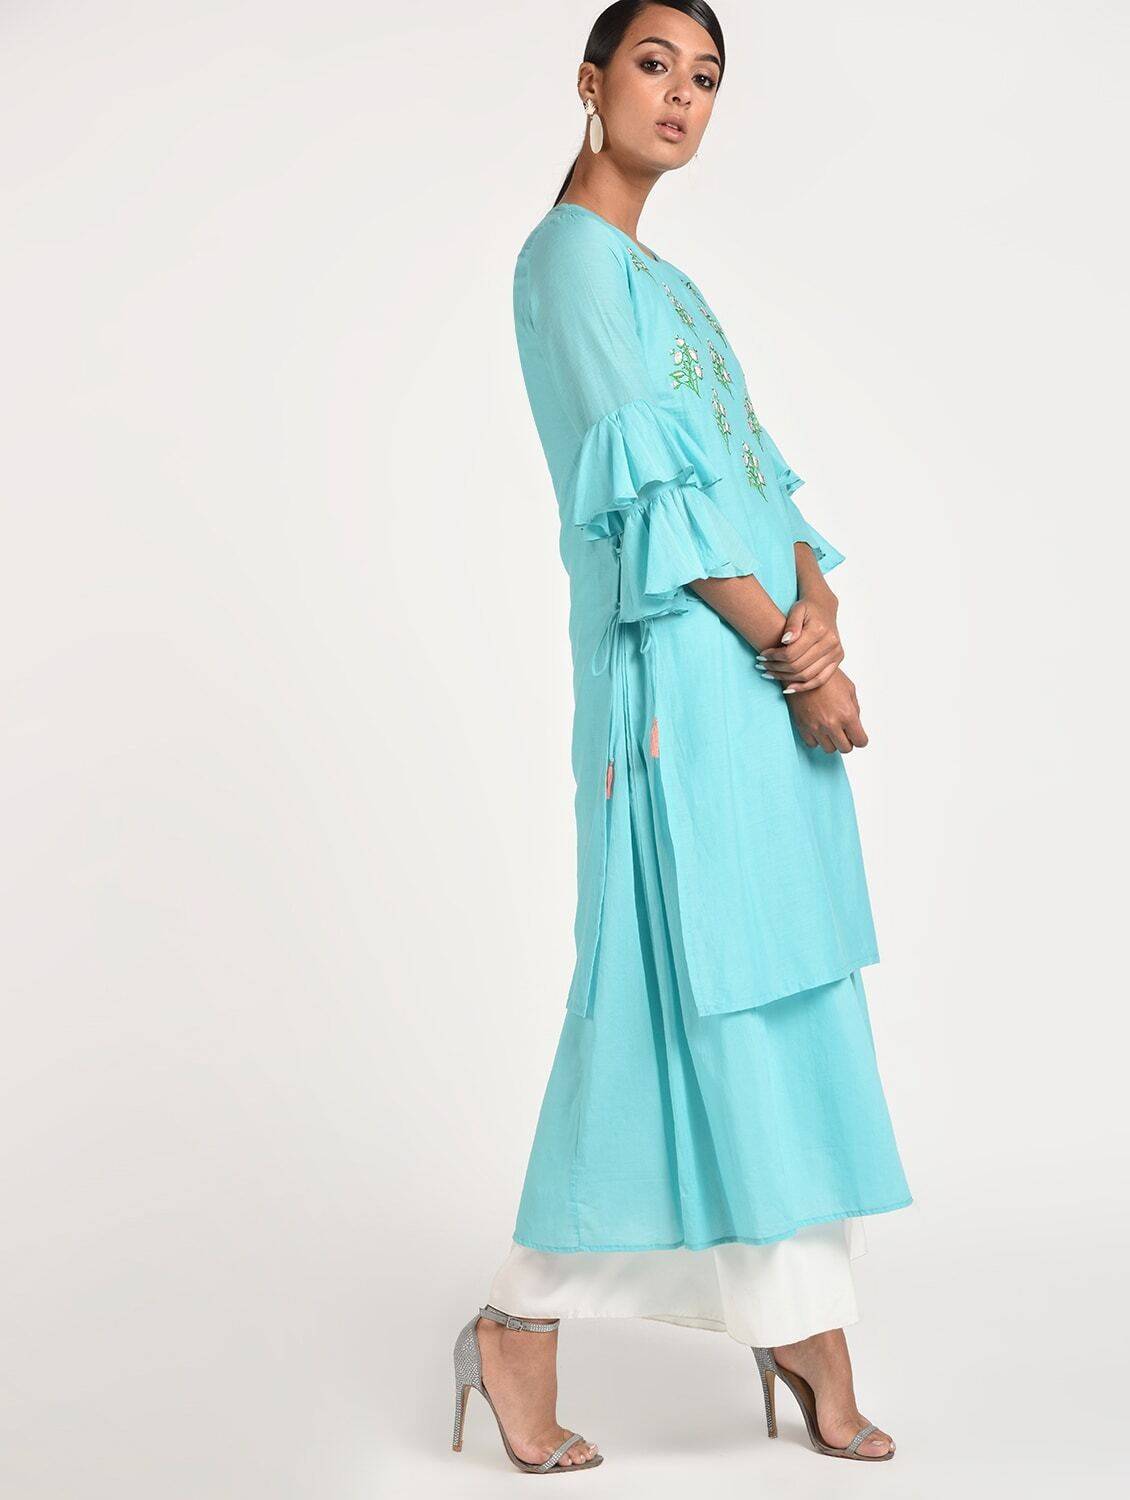 Women's Turquoise Cotton Anarkali Double Layered Kurta With Contrast Embroidery And Side Dori Tasal - Cheera